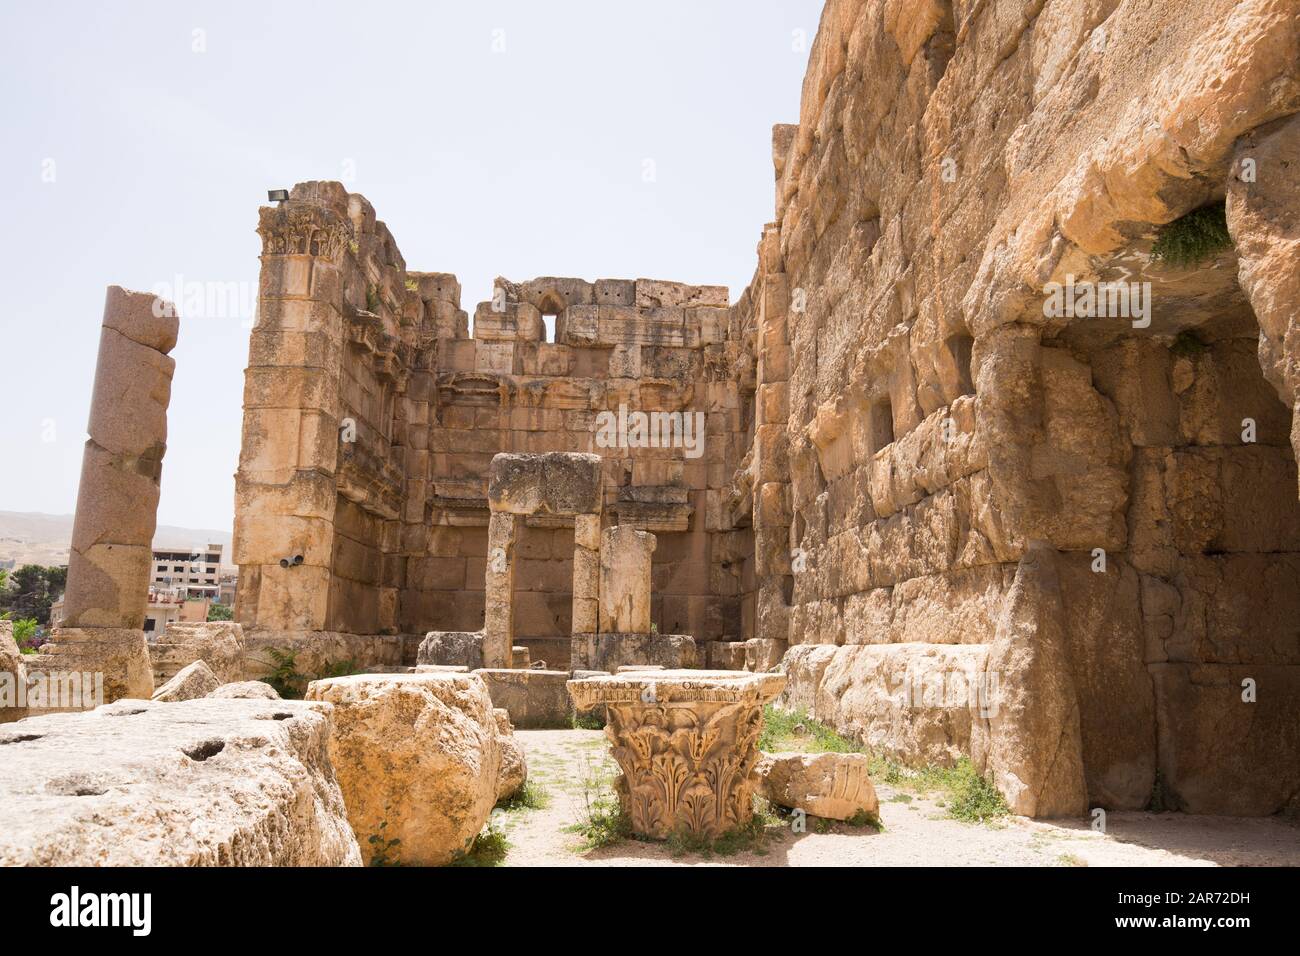 The Propylaeae. The ruins of the Roman city of Heliopolis or Baalbek in the Beqaa Valley. Baalbek, Lebanon - June, 2019 Stock Photo